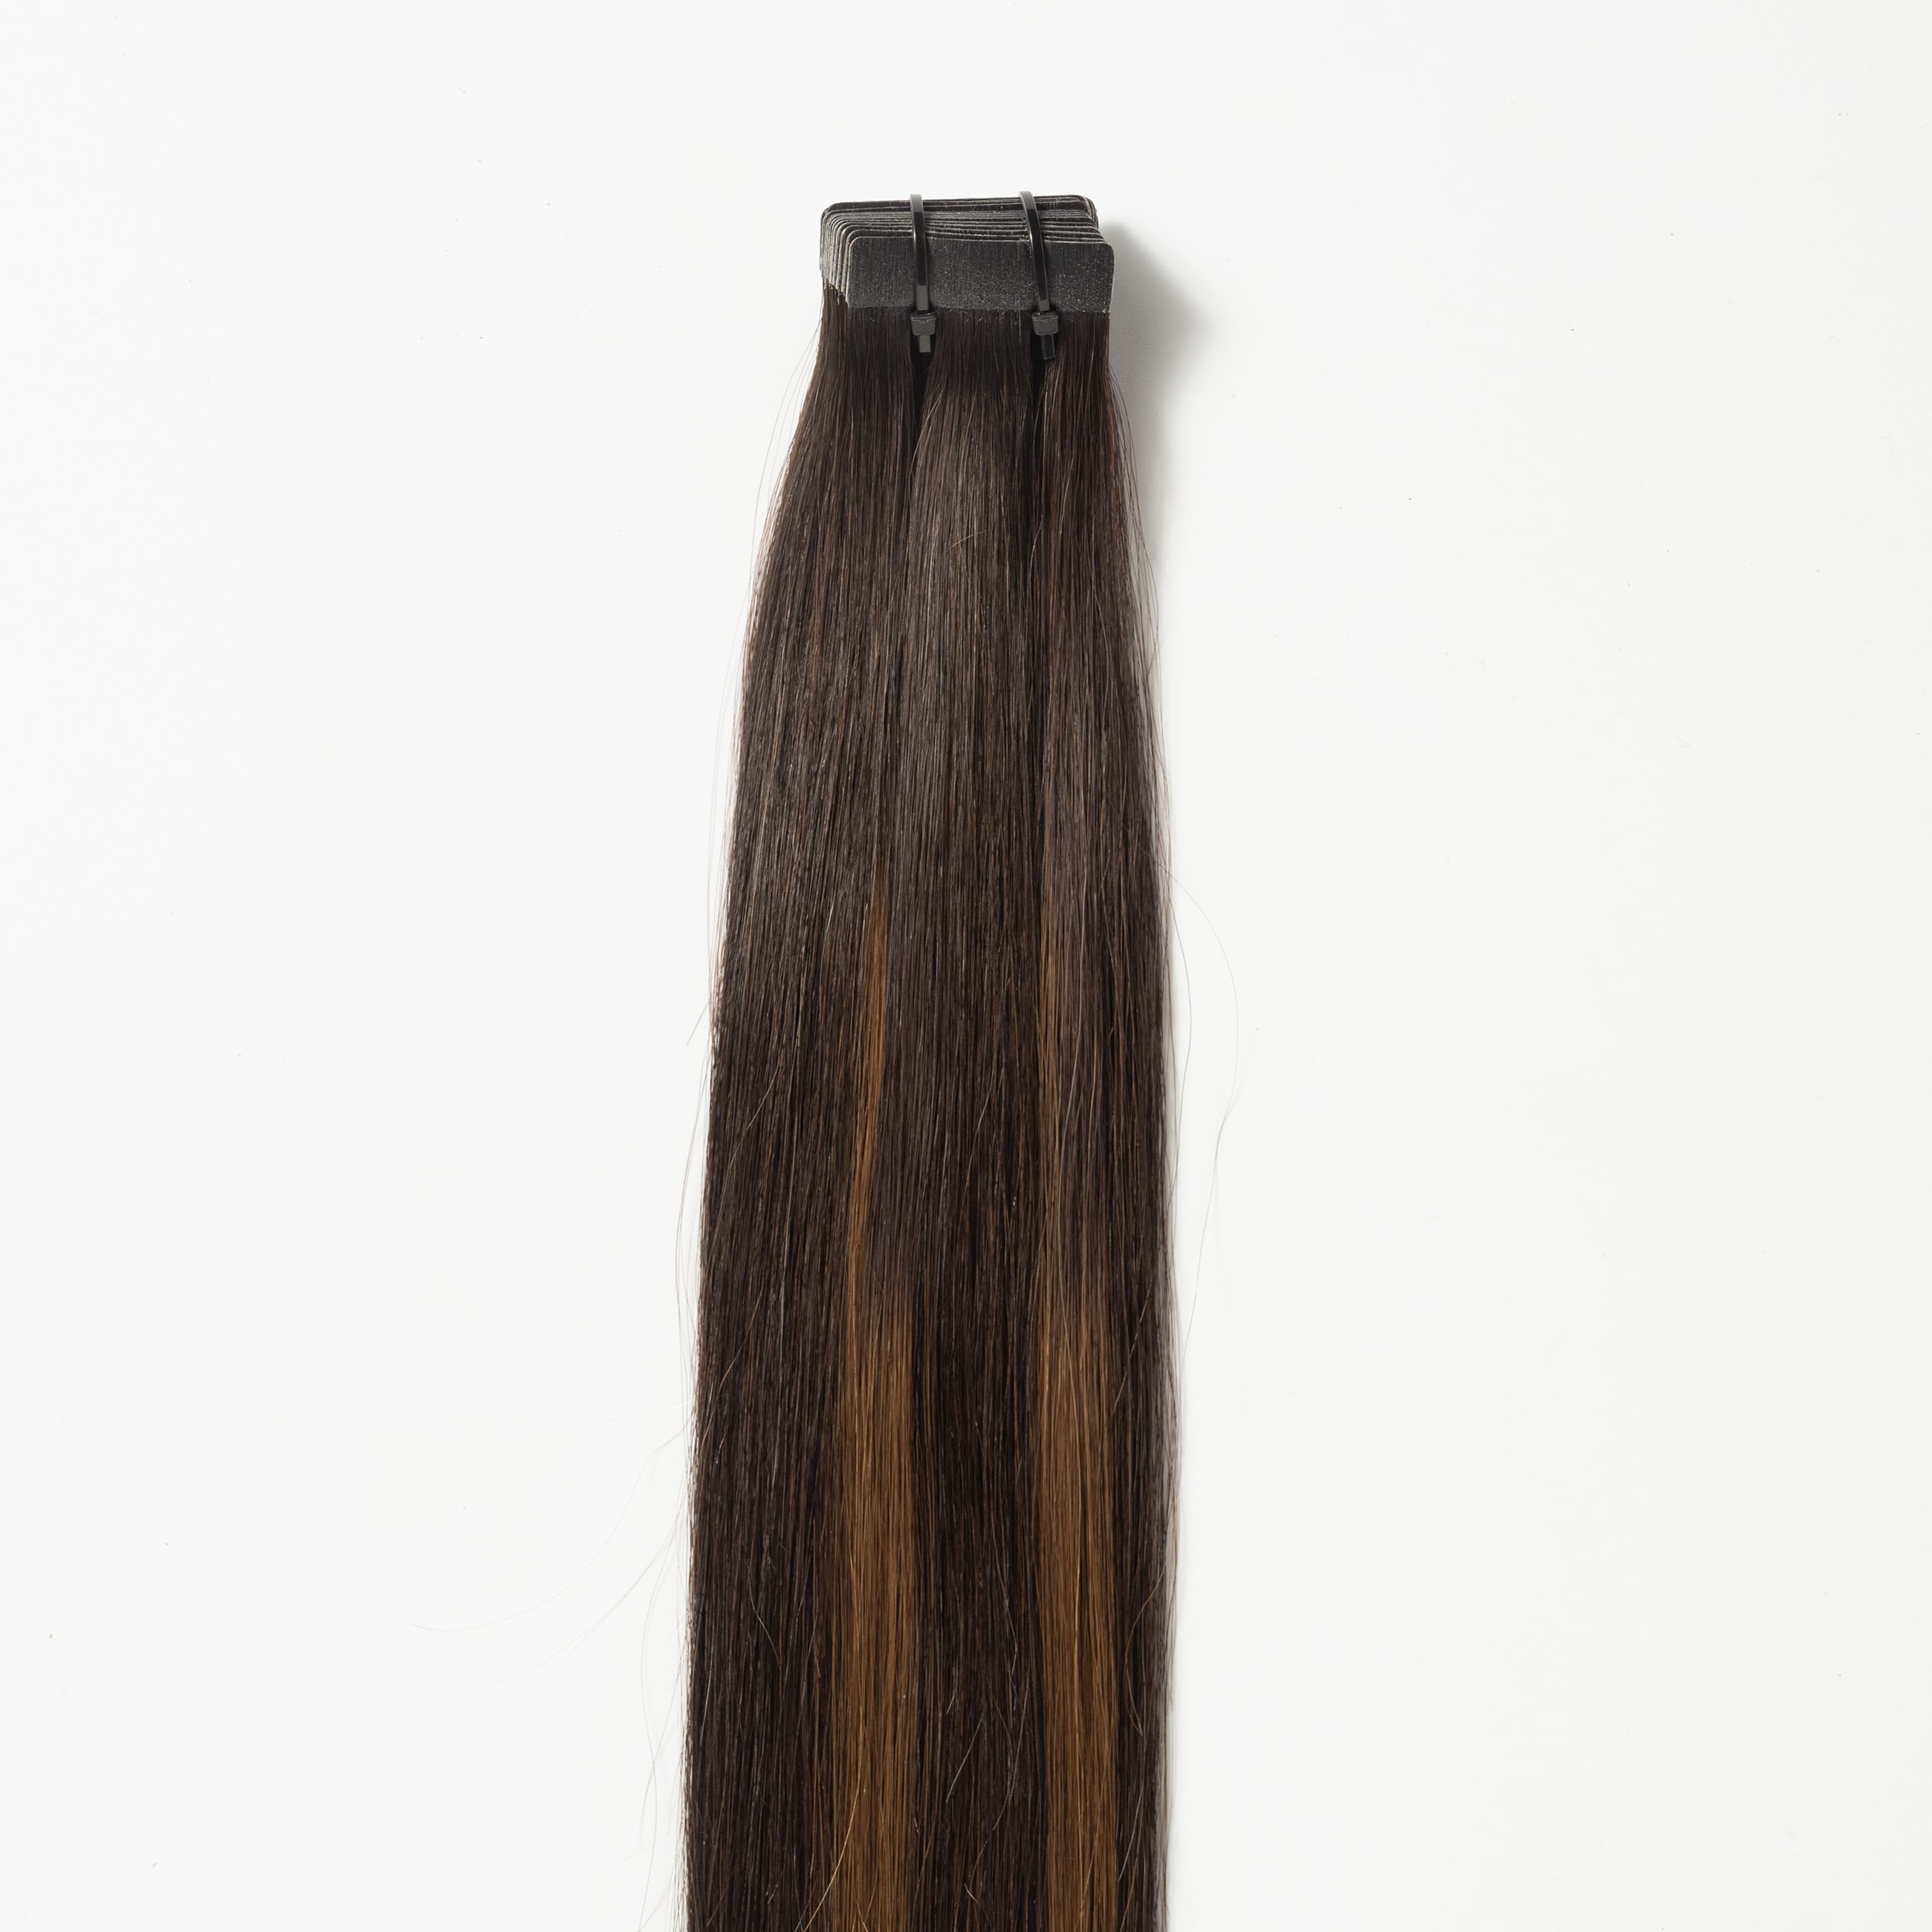 Tape extensions - Dark Chocolate Brown Balayage 1A+4